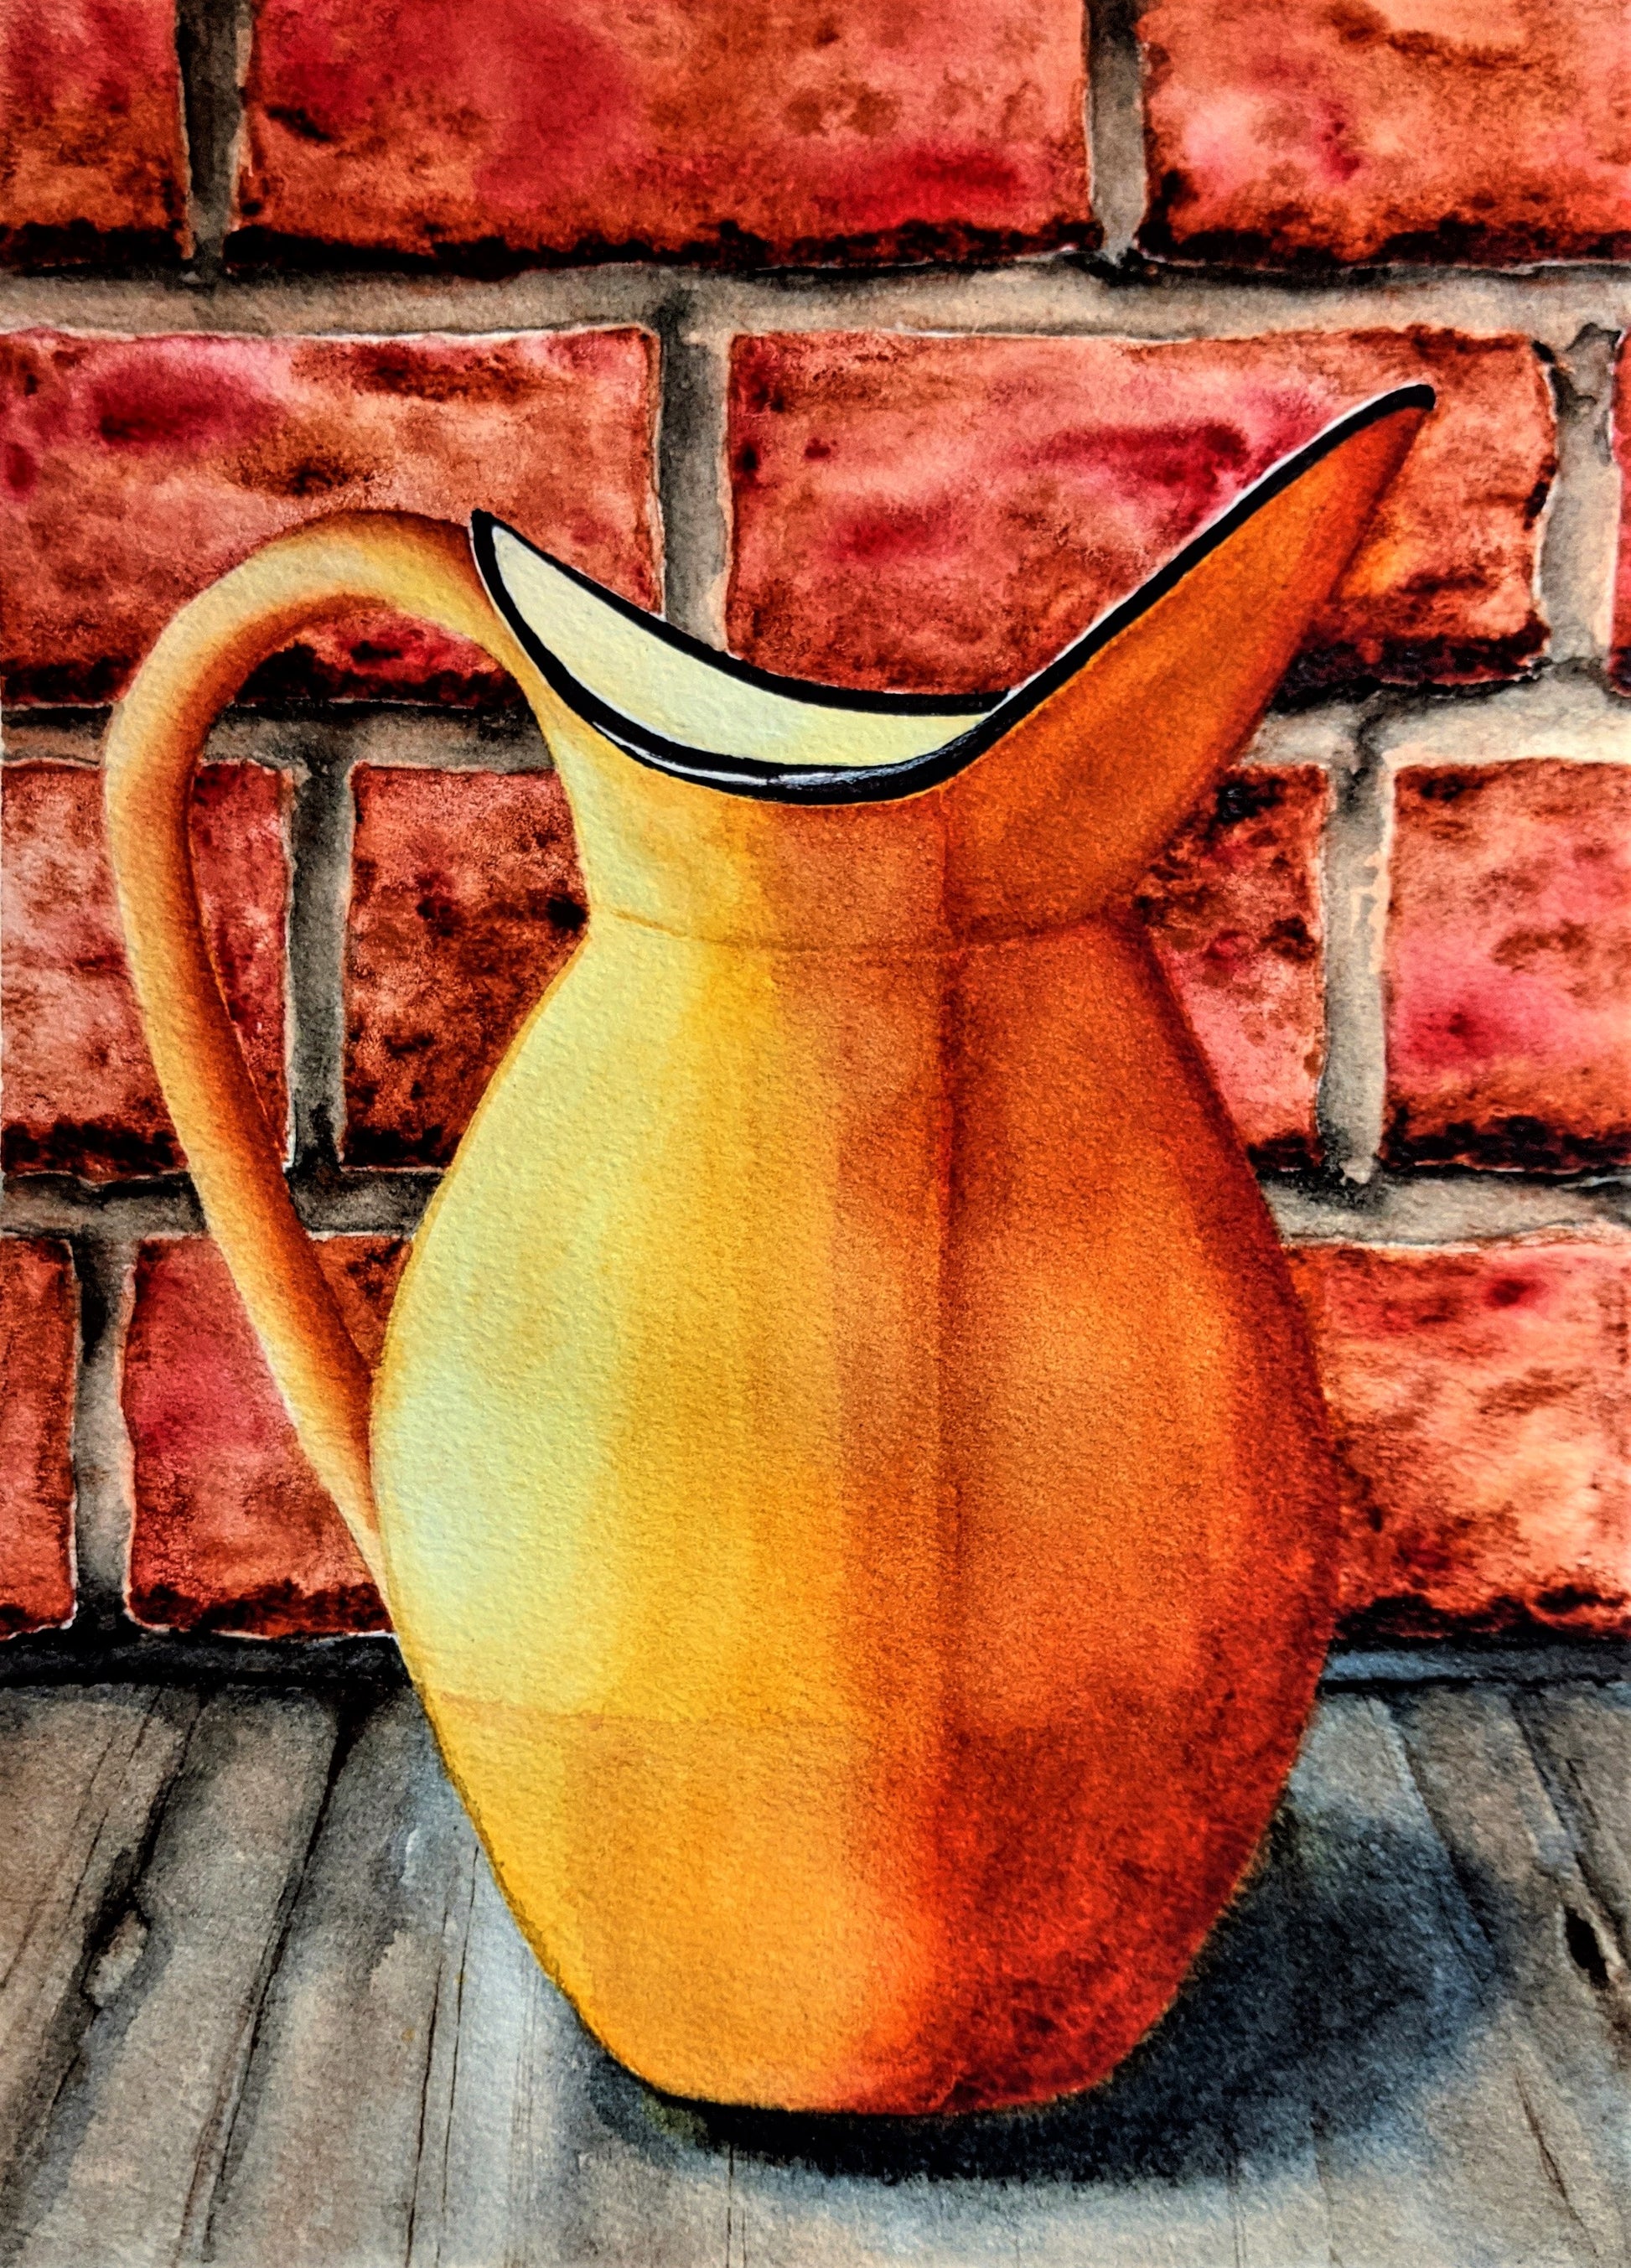 Harvest Pitcher watercolor on paper painting